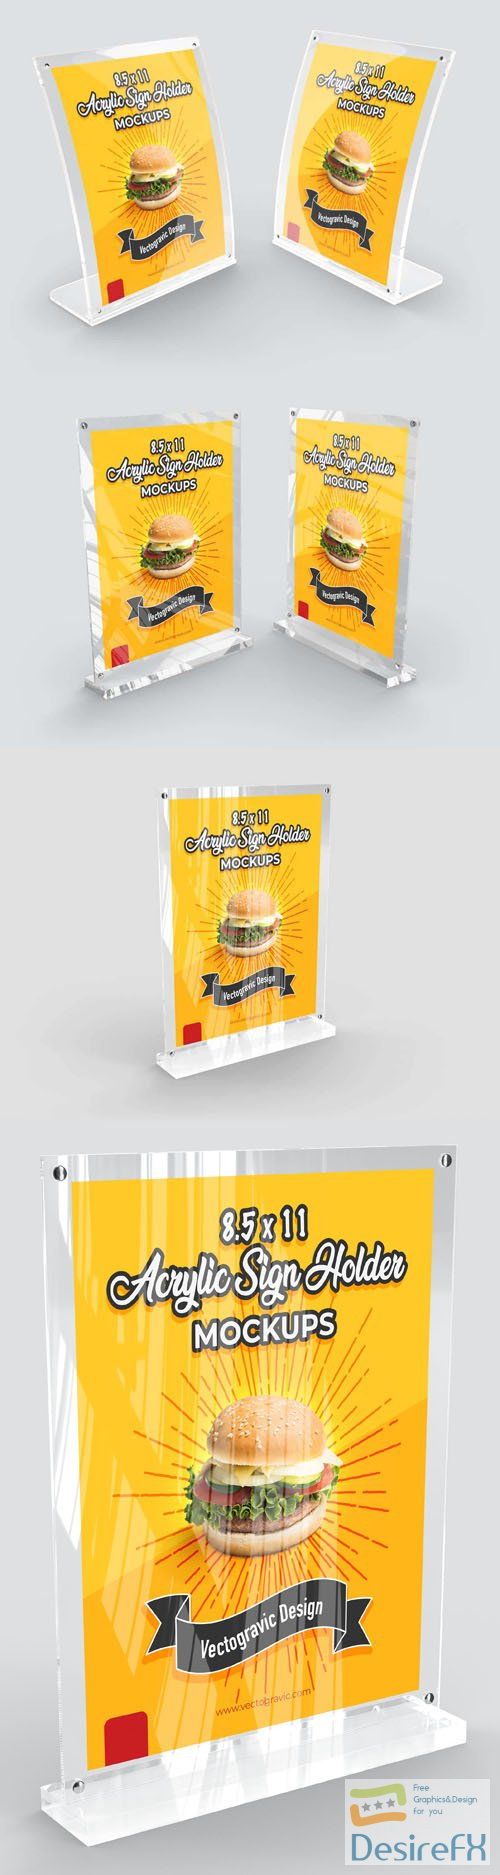 8.5 x 11 Sign Holders PSD Mockups Templates